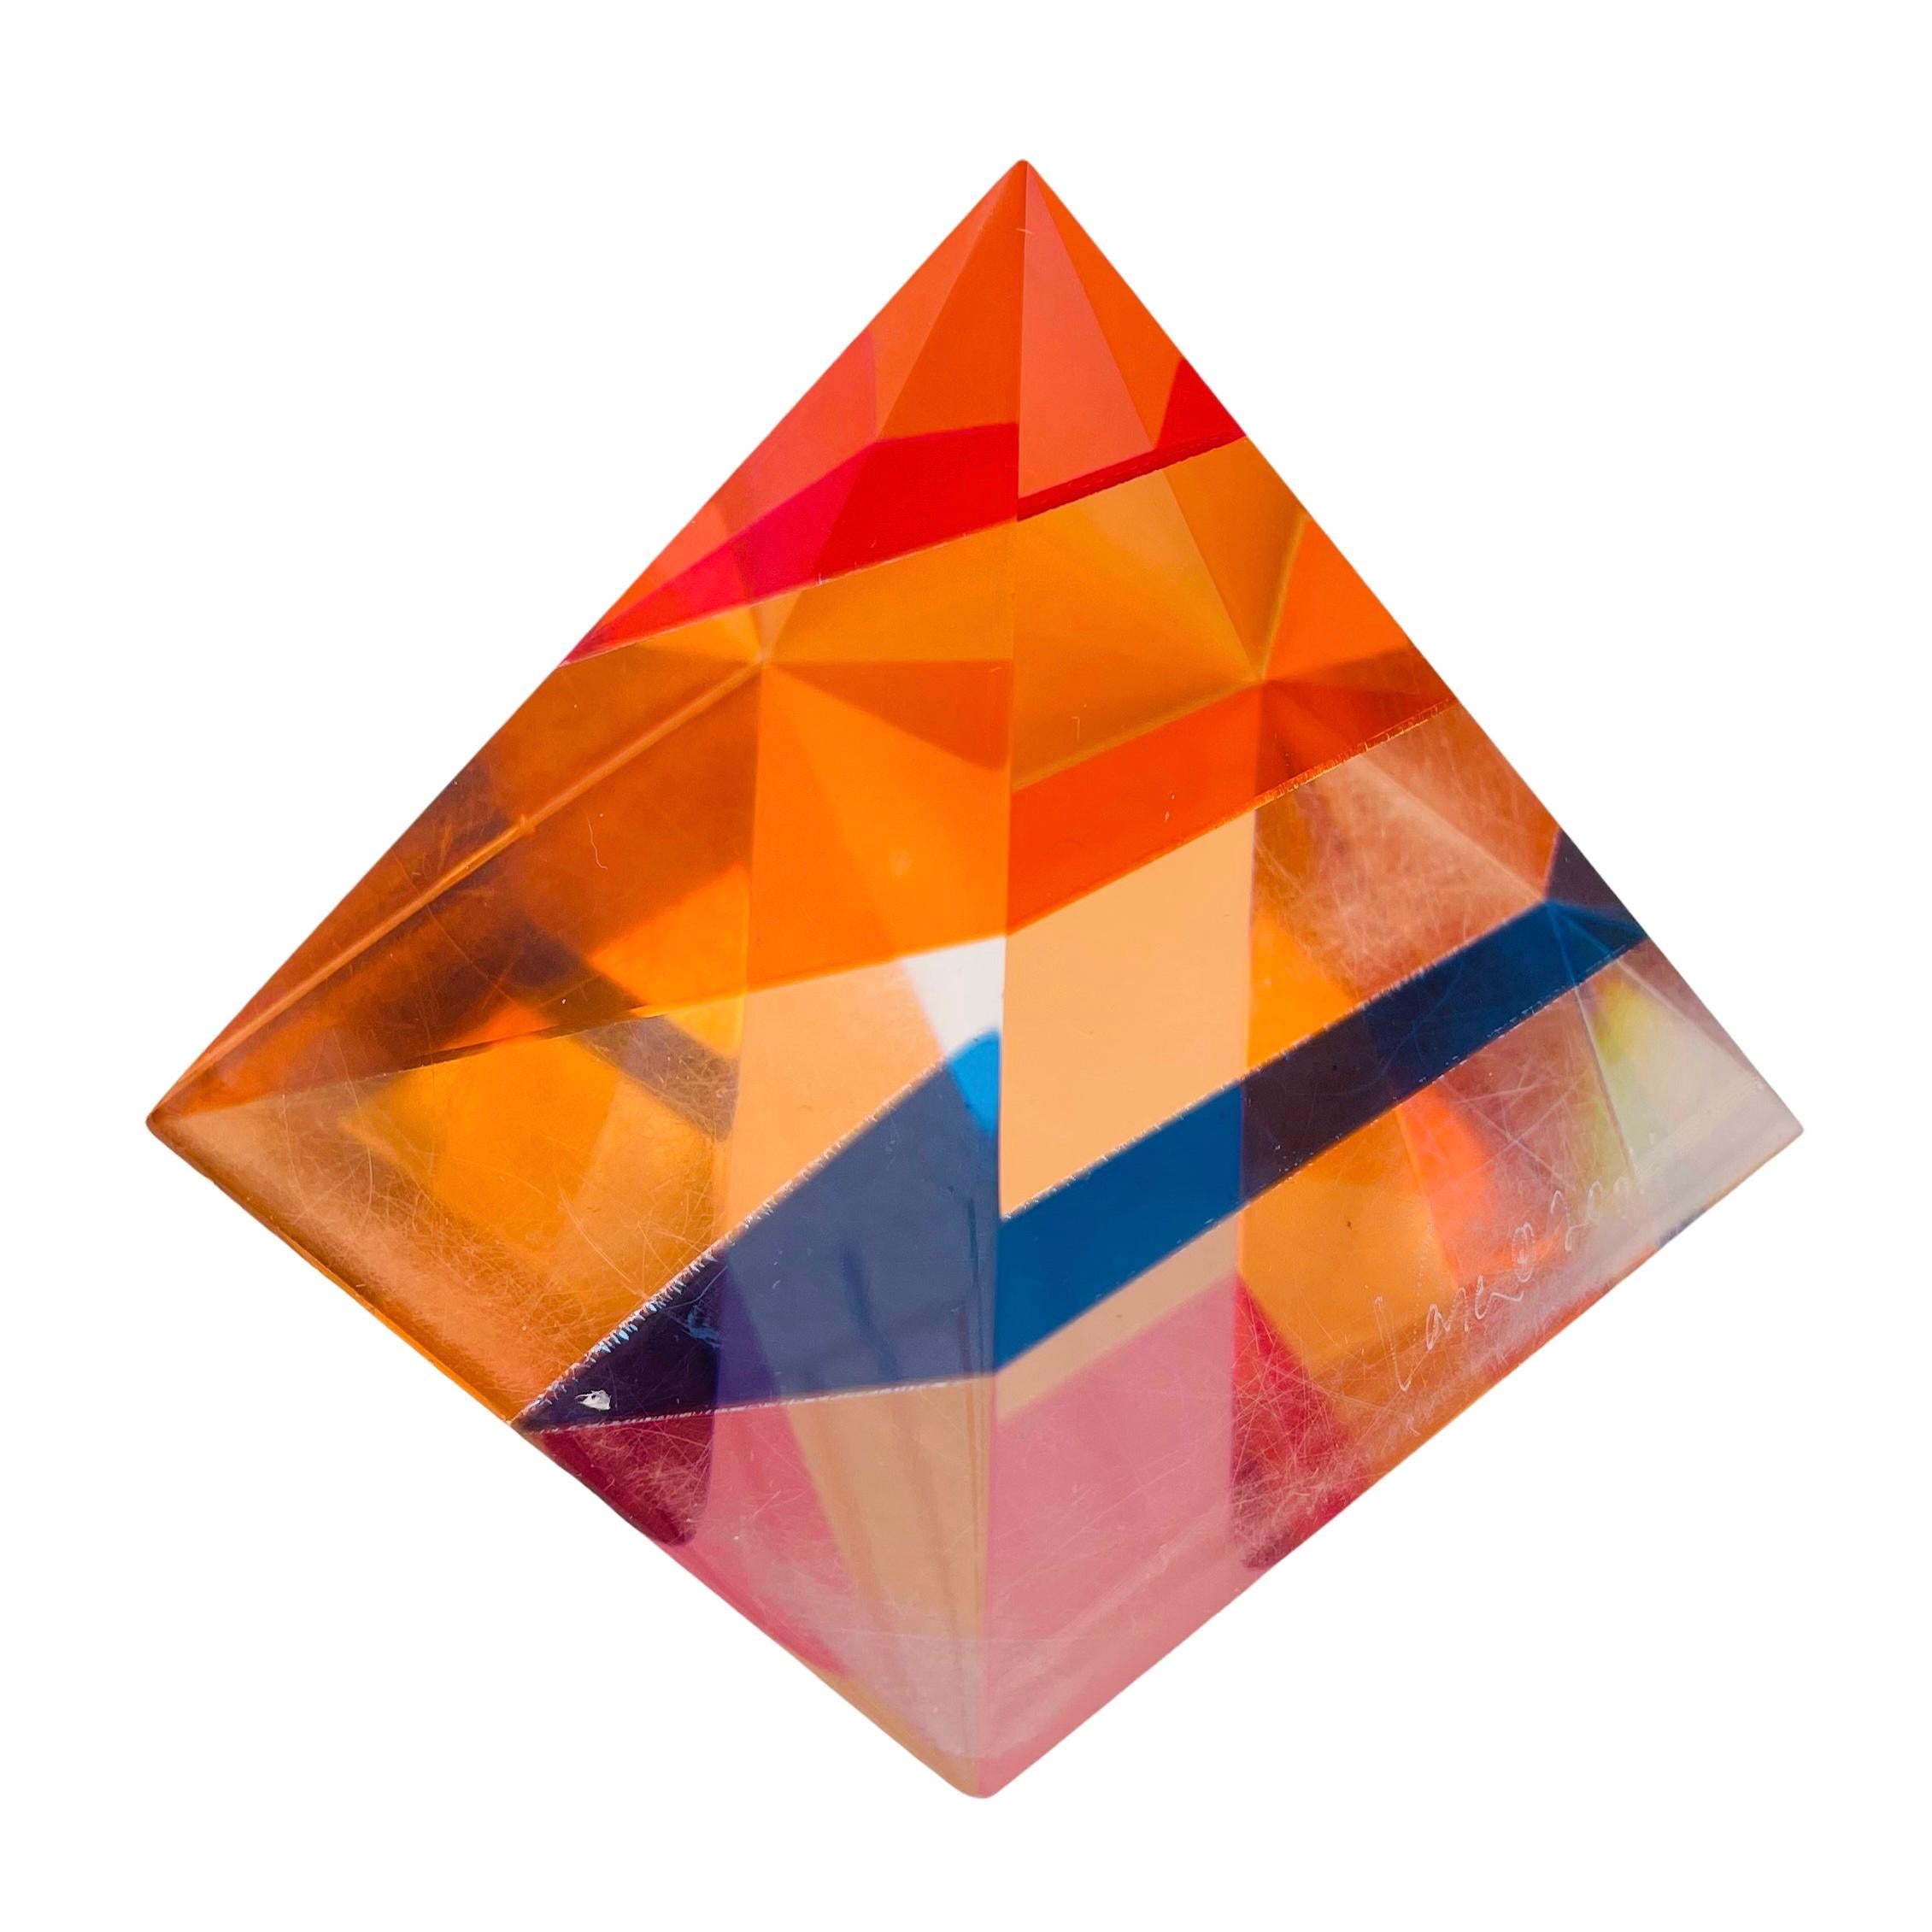 Beautiful Vasa pyramid with hues of orange, blue, and red. Signed. 2000s. Surface scratches. 

3.5” H x 4” W x 3.5” D

Vasa Mihich is a Yugoslavian-born artist living and working in Los Angeles. He taught for many years as a senior professor of